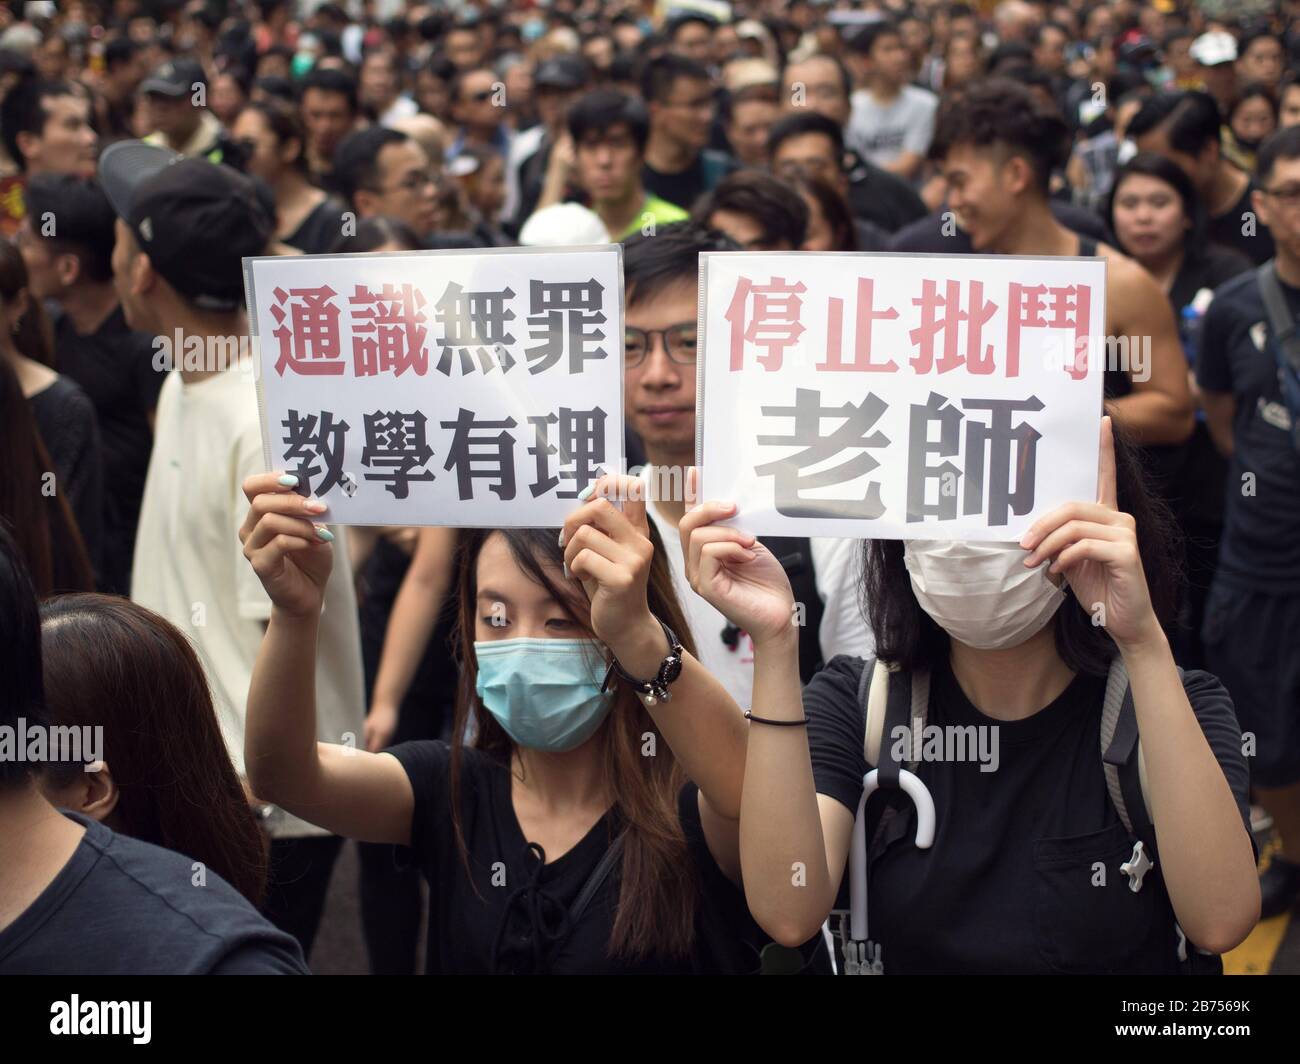 About 230,000 protesters march against the extradition bill in the touristic area of Kowloon in Hong Kong. Some protesters hand out pamplets to Mainland Chinese tourist to explain their causes and idea. The Chinese characters read:'Liberal Studies was not at fault, stop persecuting teacher'. Stock Photo